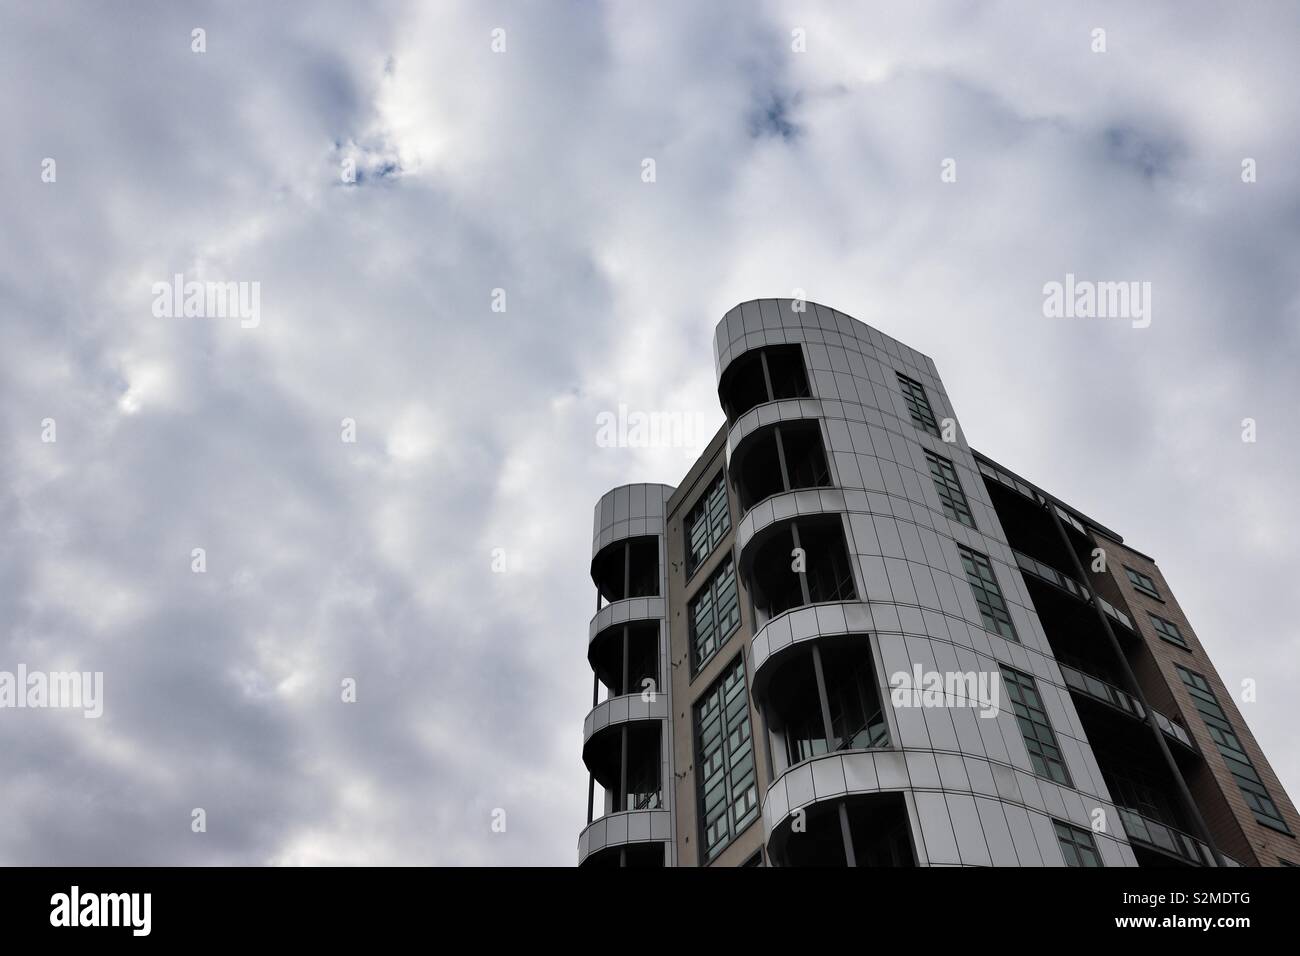 Abstract architecture Stock Photo